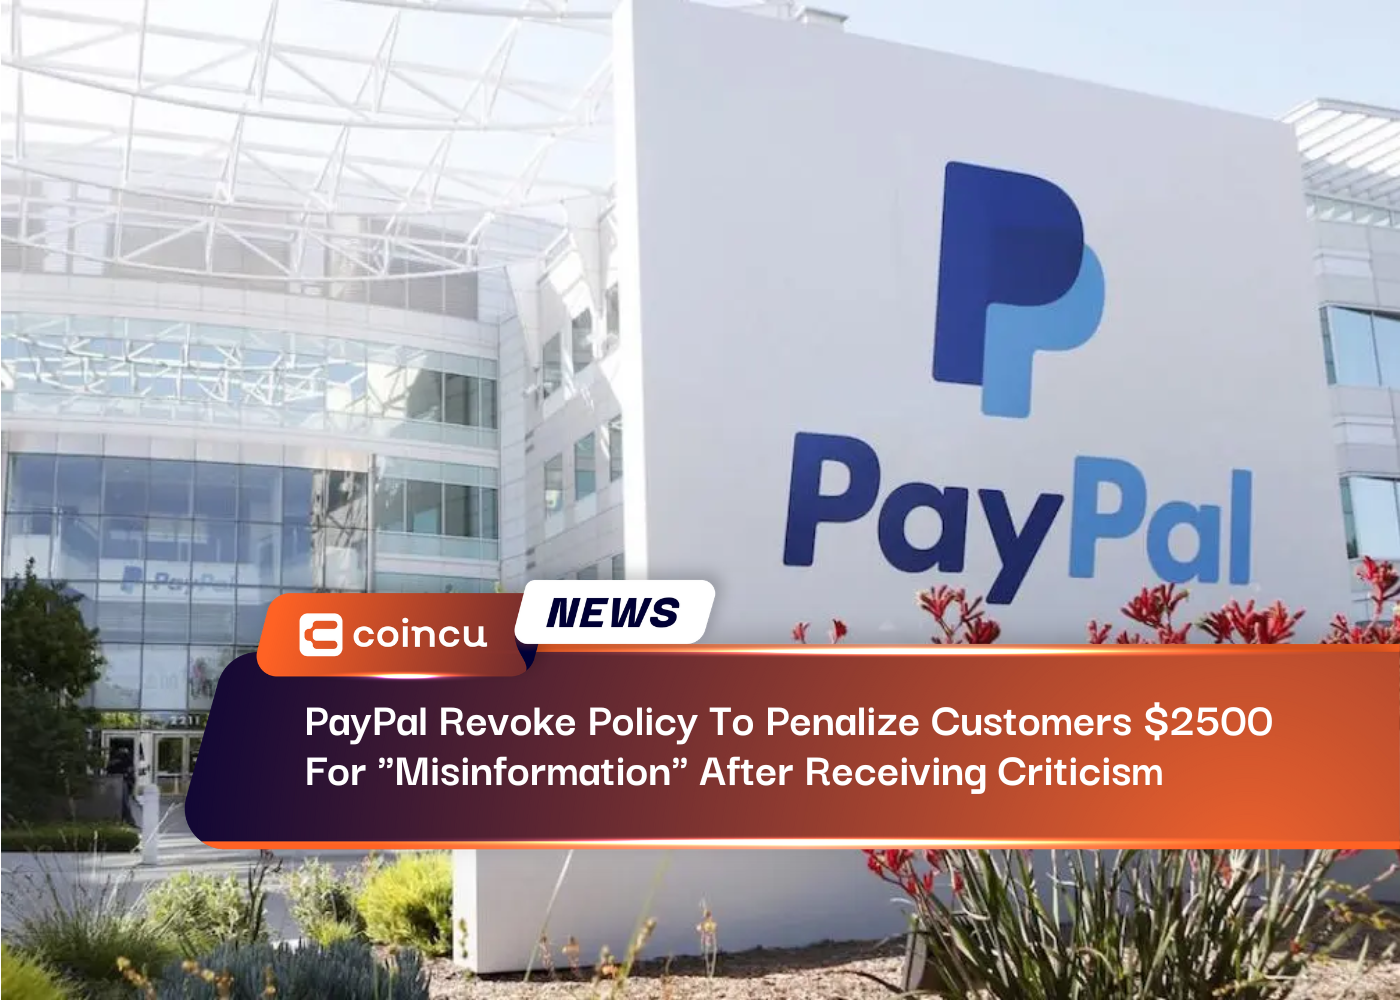 PayPal Revoke Policy To Penalize Customers $2500 For "Misinformation" After Receiving Criticism